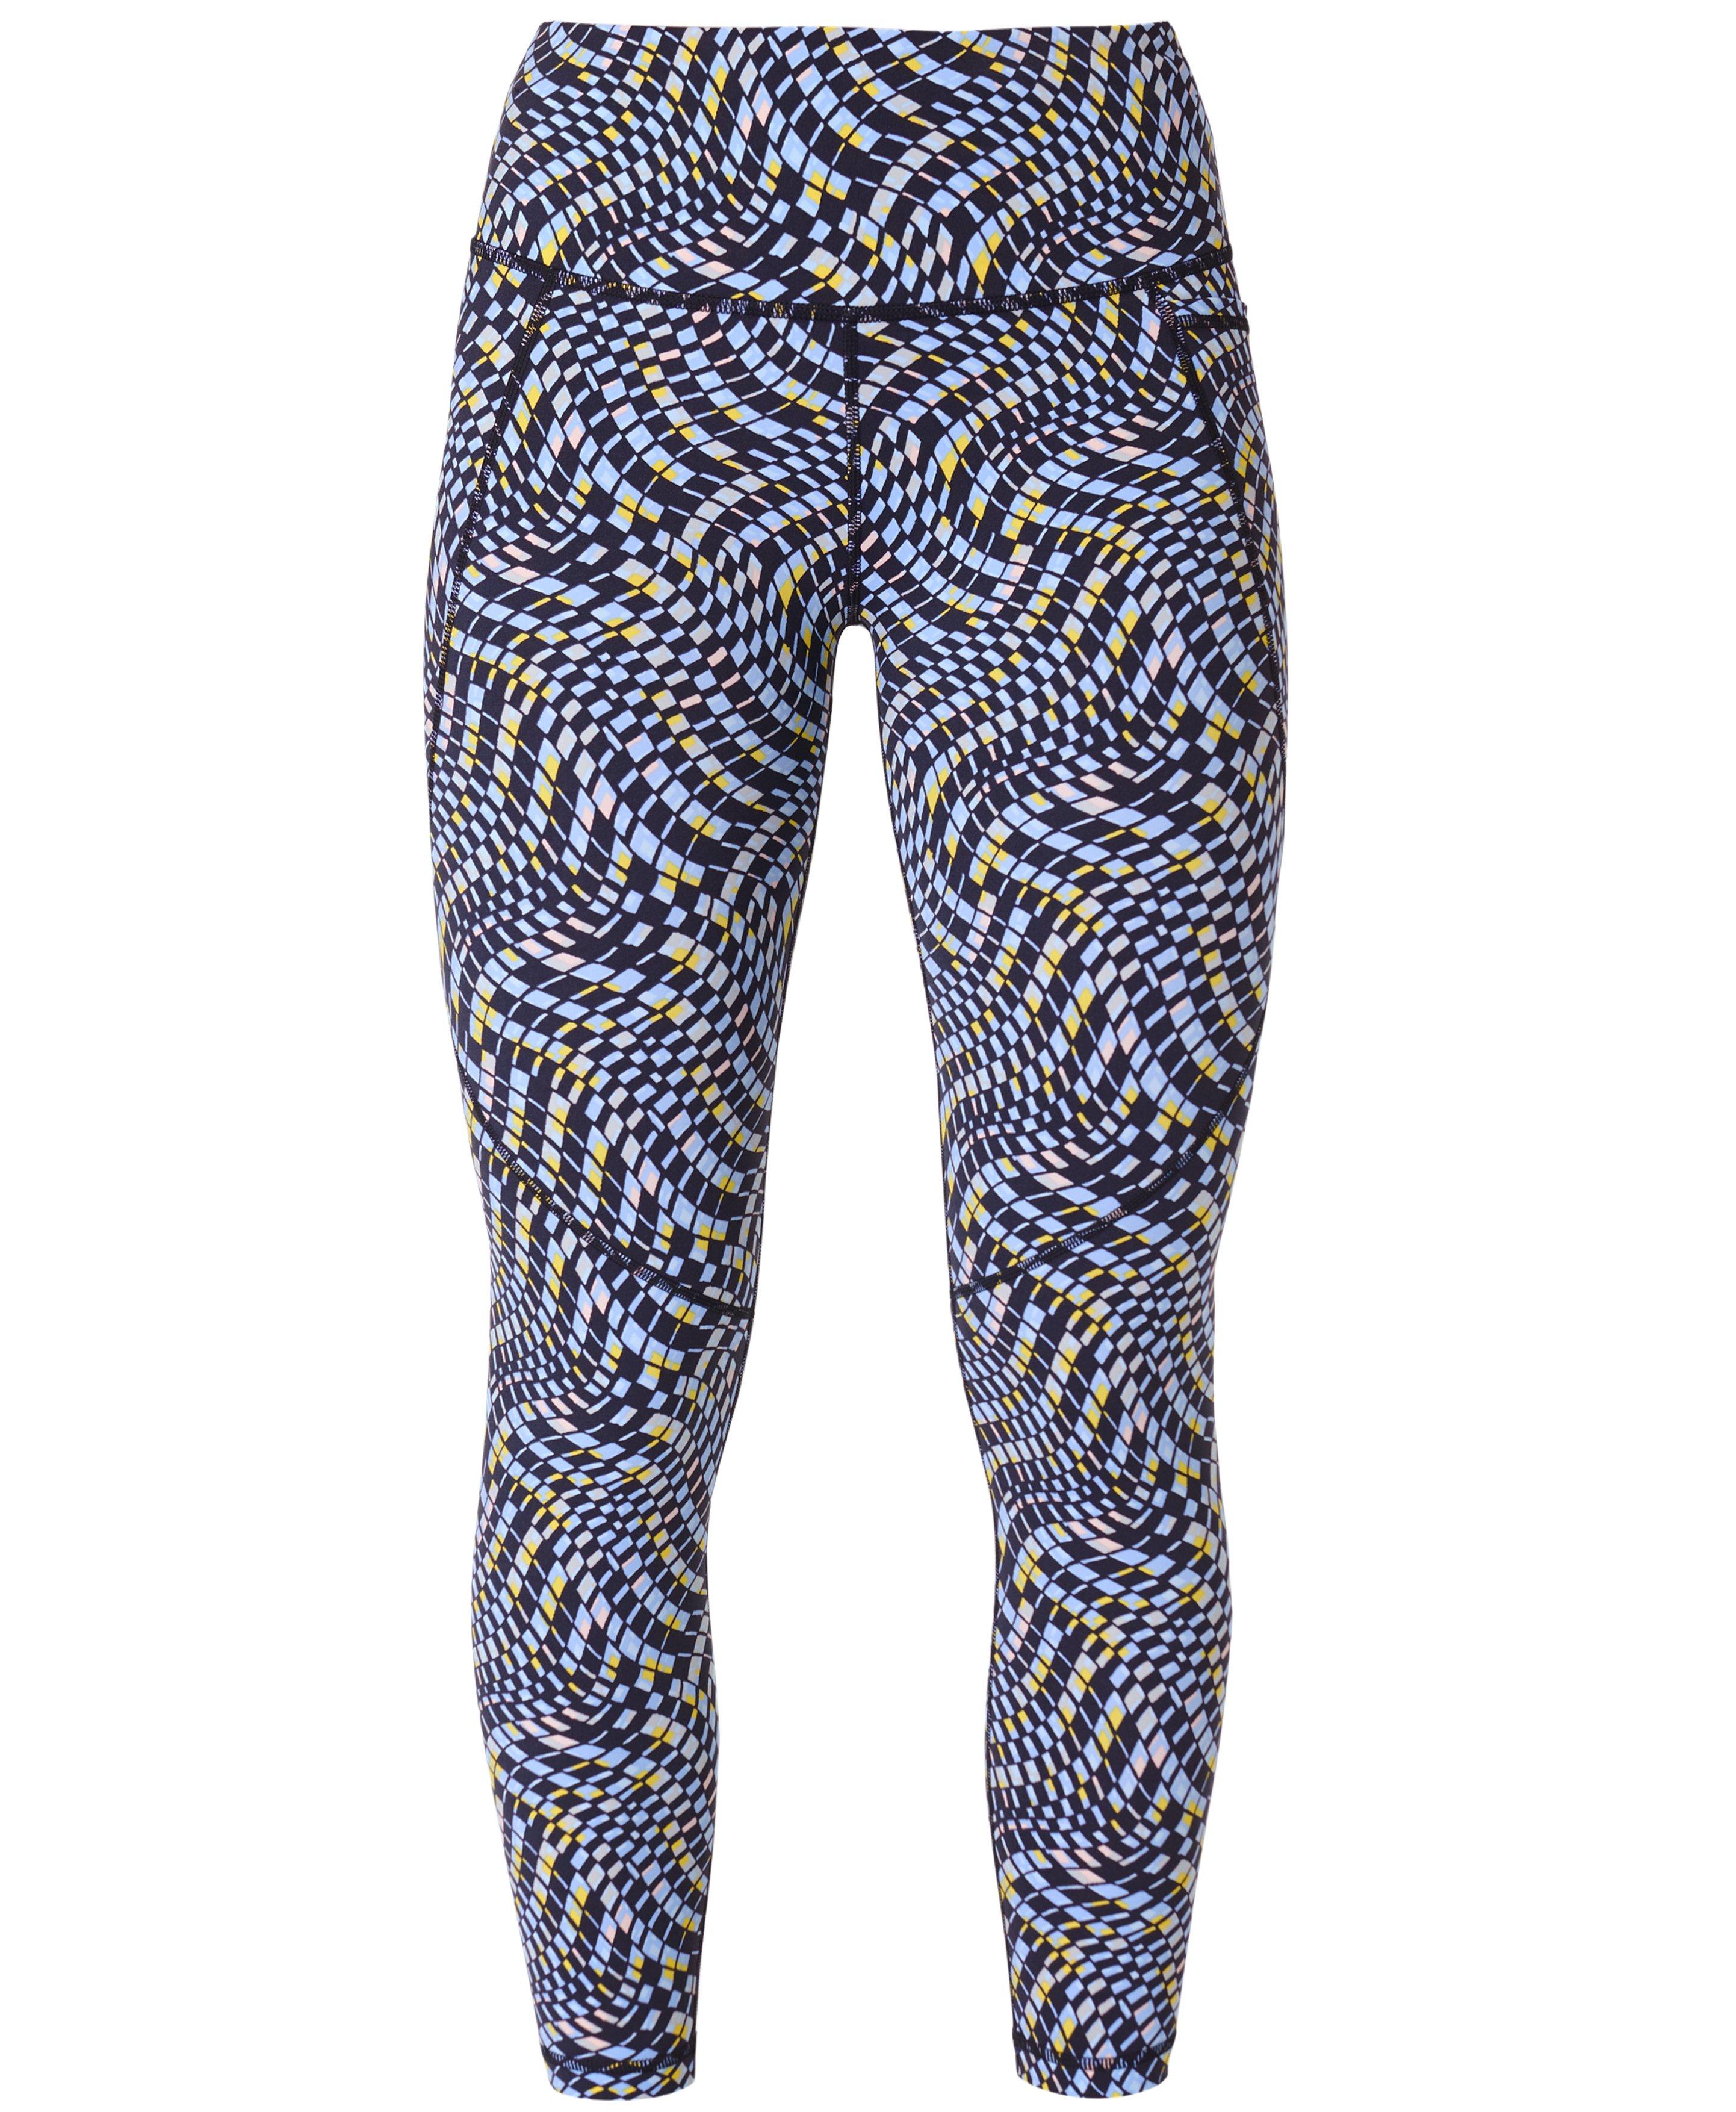 Sweaty Betty Power 7/8 Workout Leggings  Anthropologie Japan - Women's  Clothing, Accessories & Home